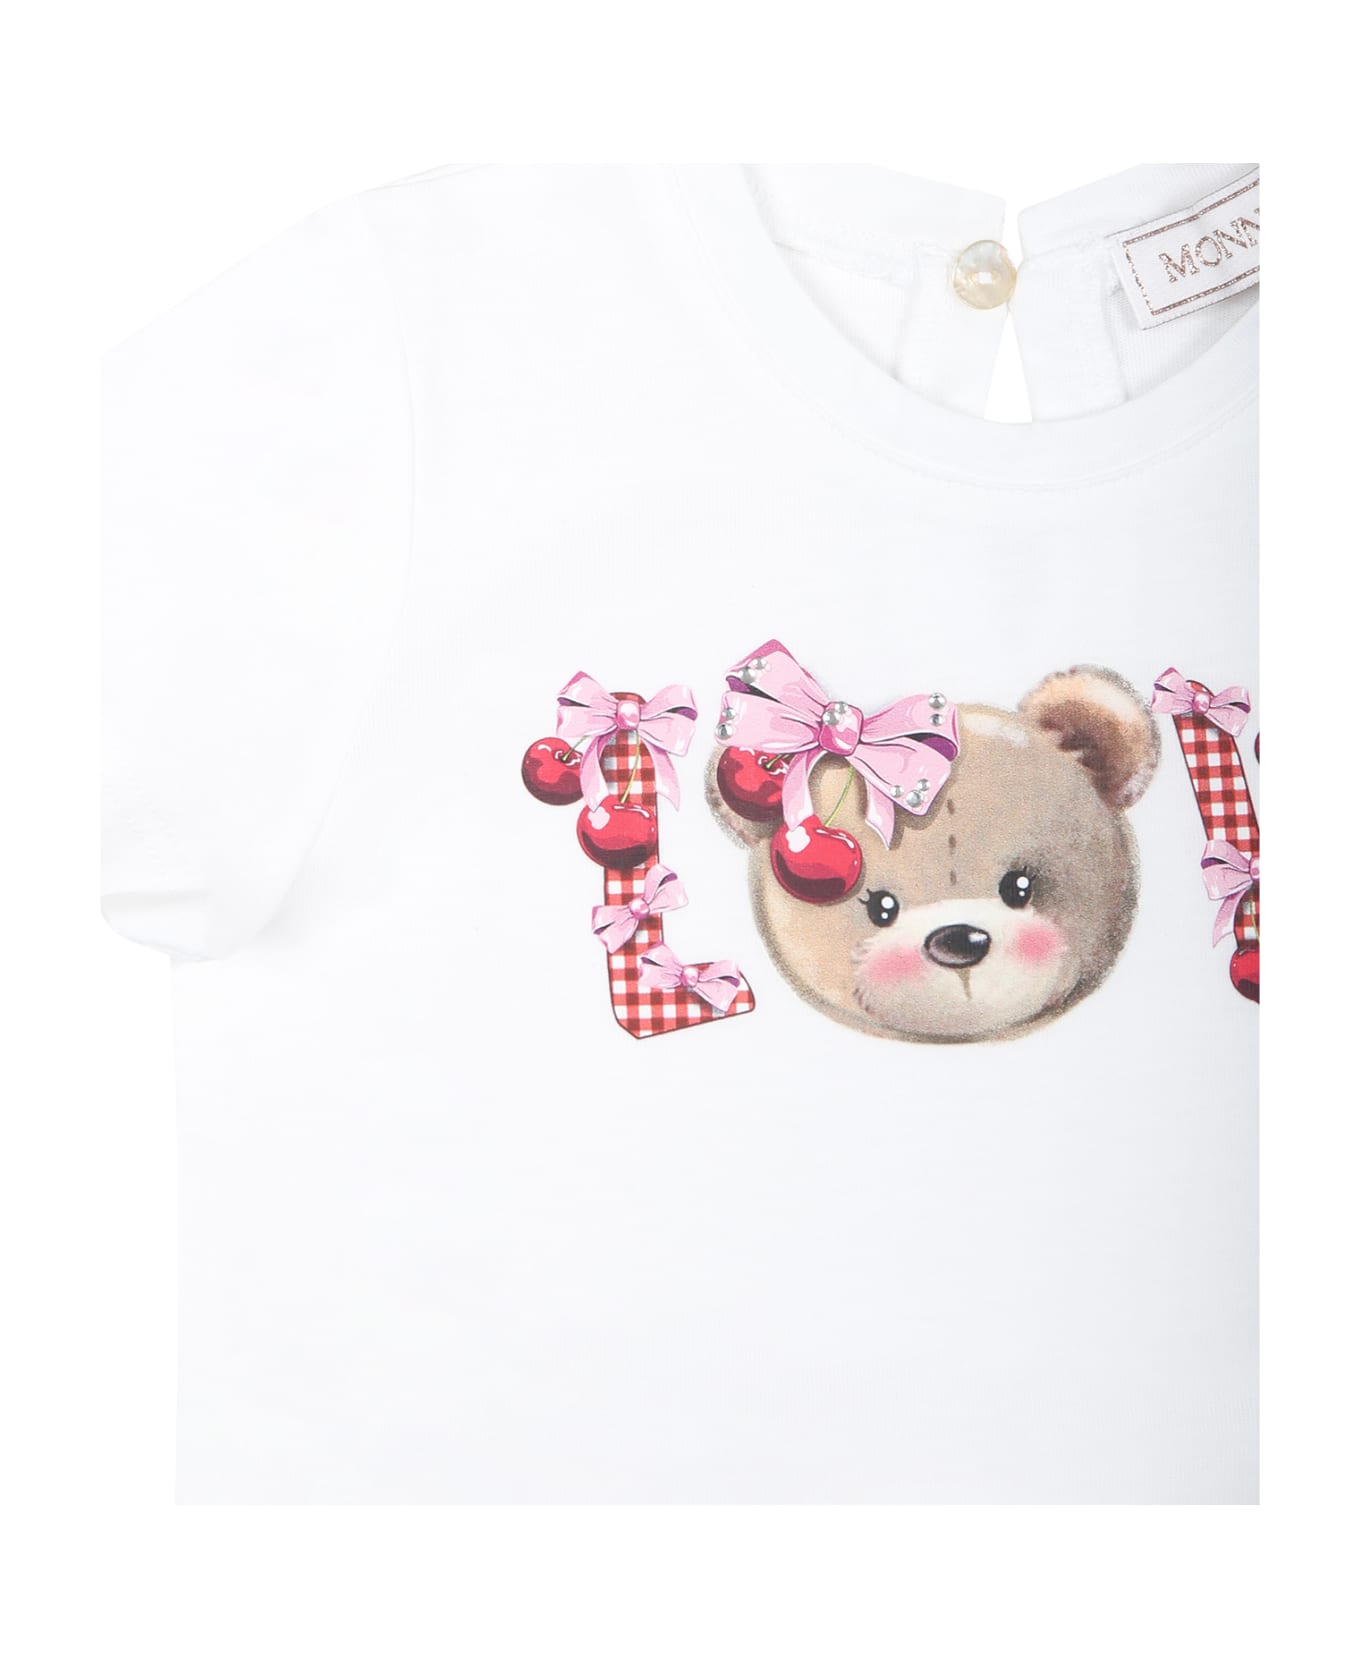 Monnalisa White T-shirt For Baby Girl With Bear Print And Writing - White Tシャツ＆ポロシャツ